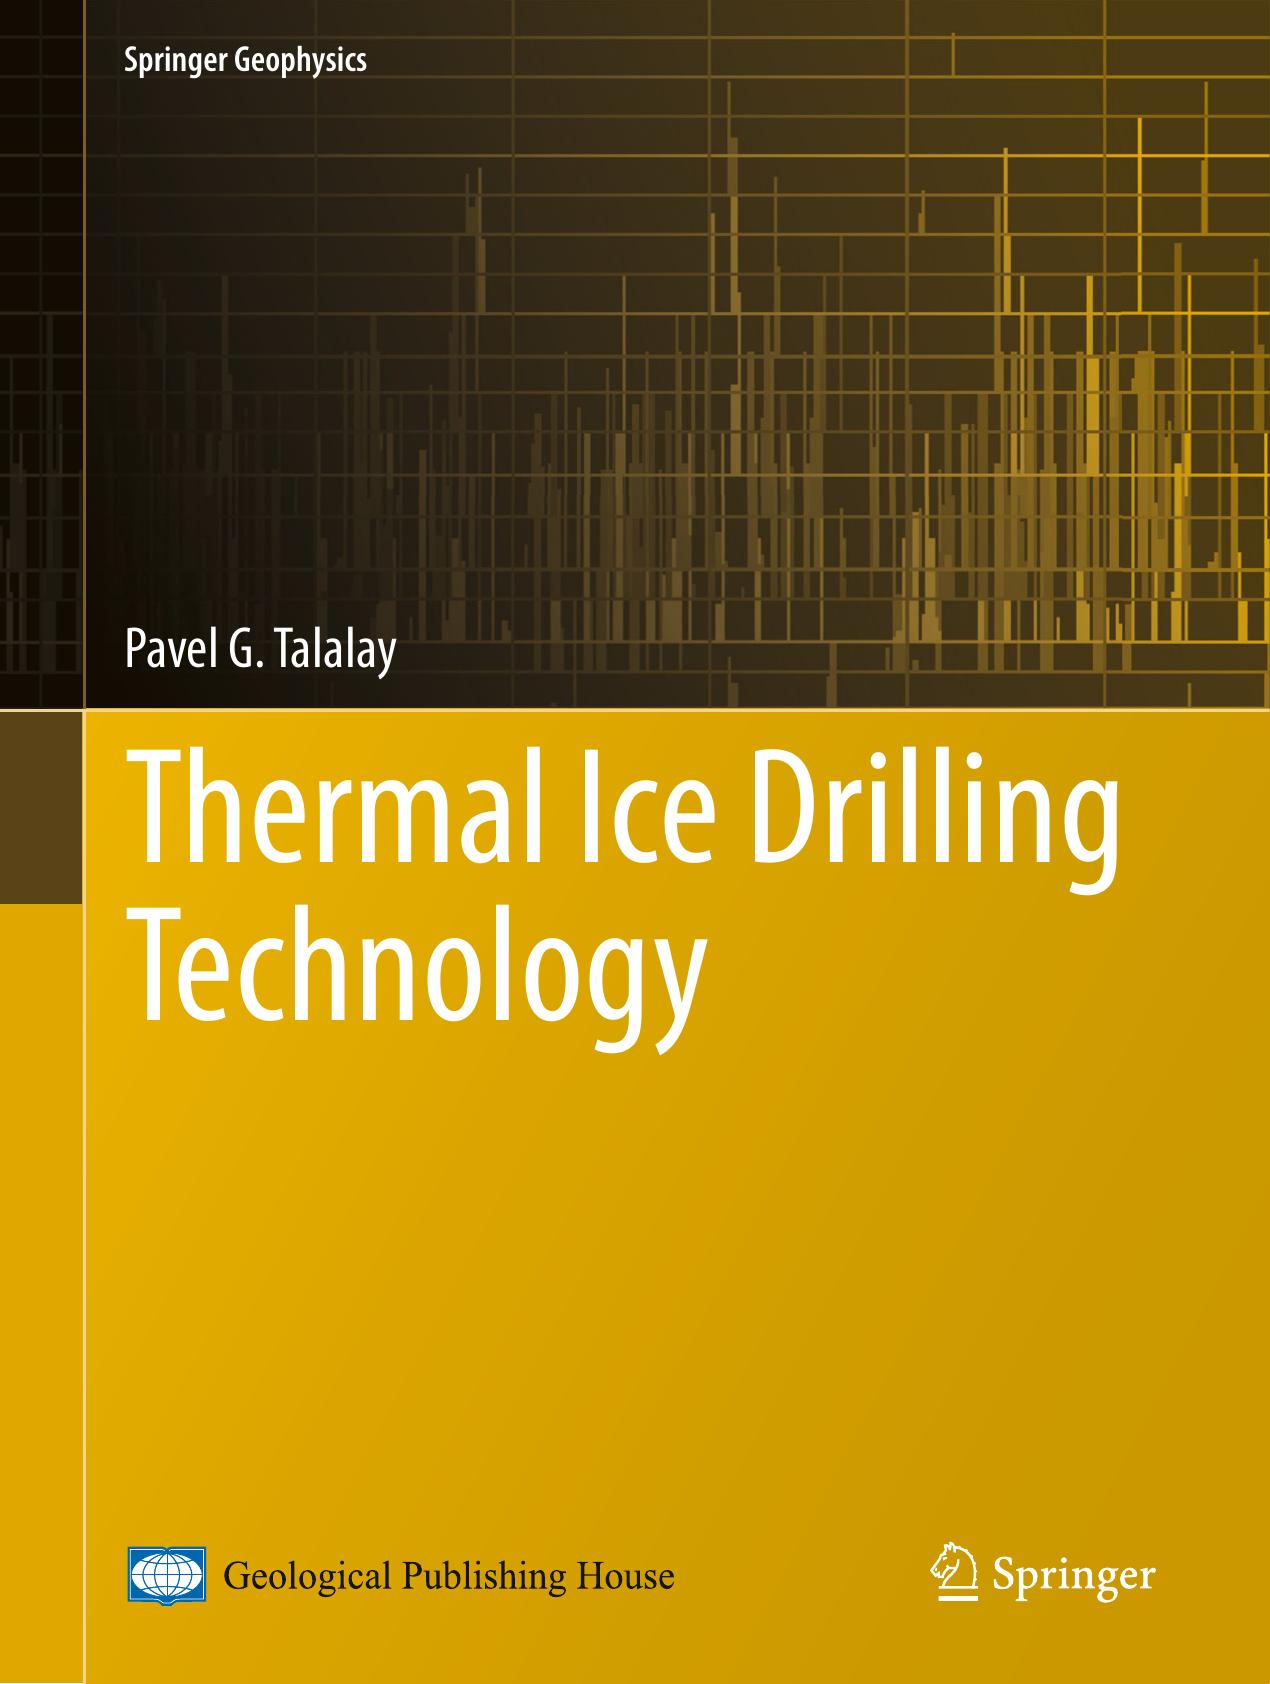 Thermal Ice Drilling Technology-Springer 2020